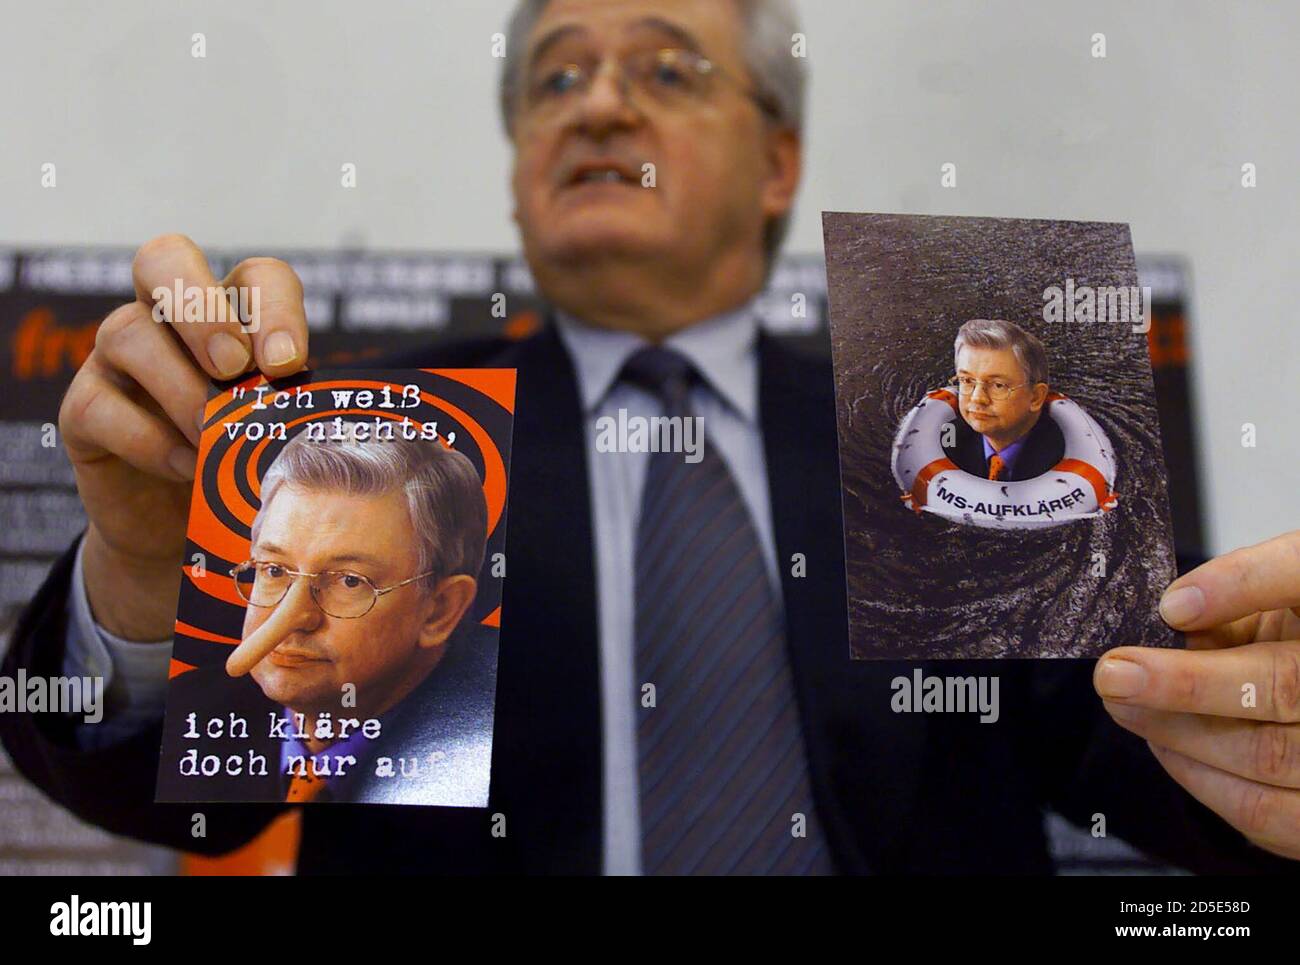 Armin Clauss, parliamentary floor leader of the opposition Social  Democratic Party (SPD) in the state parliament of the German state of  Hesse, displays postcards which show Hesse's Prime Minister Roland Koch, of